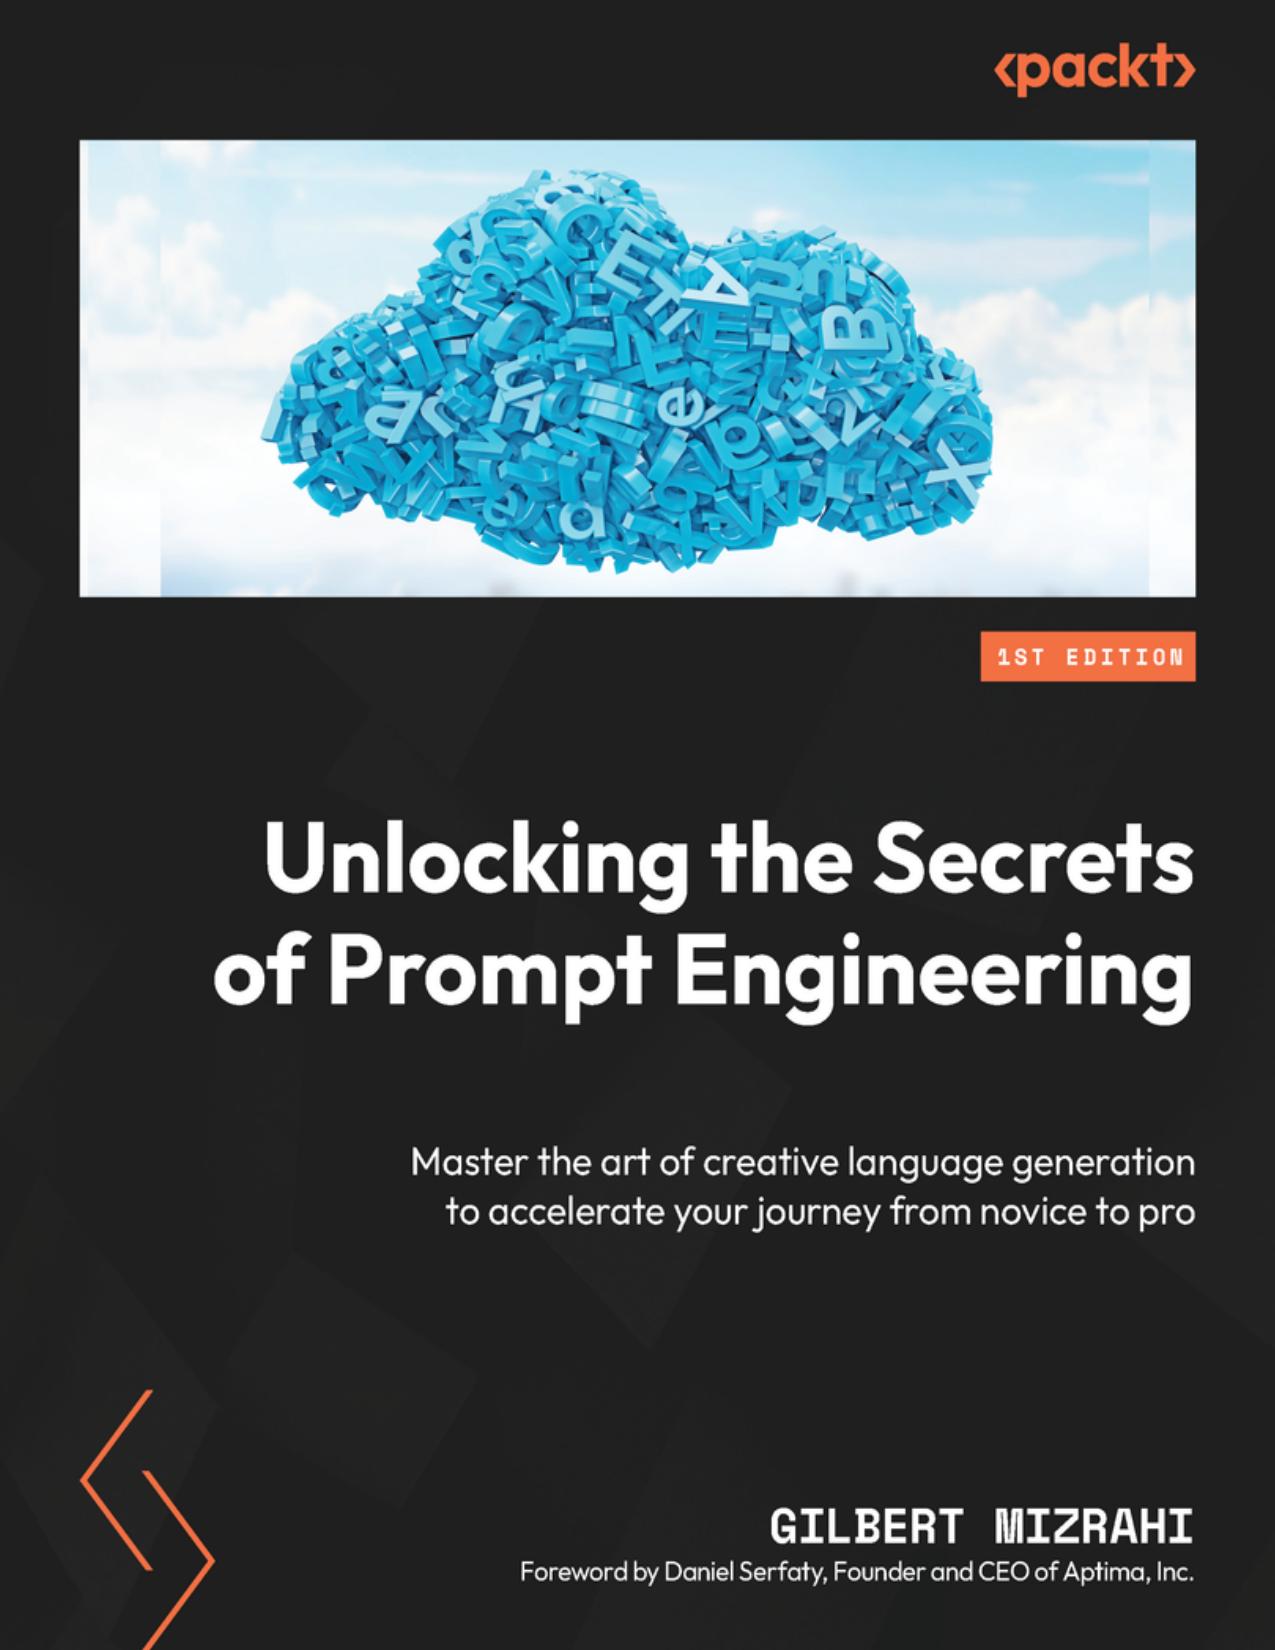 Unlocking the Secrets of Prompt Engineering: Master the Art of Creative Language Generation to Accelerate Your Journey From Novice to Pro